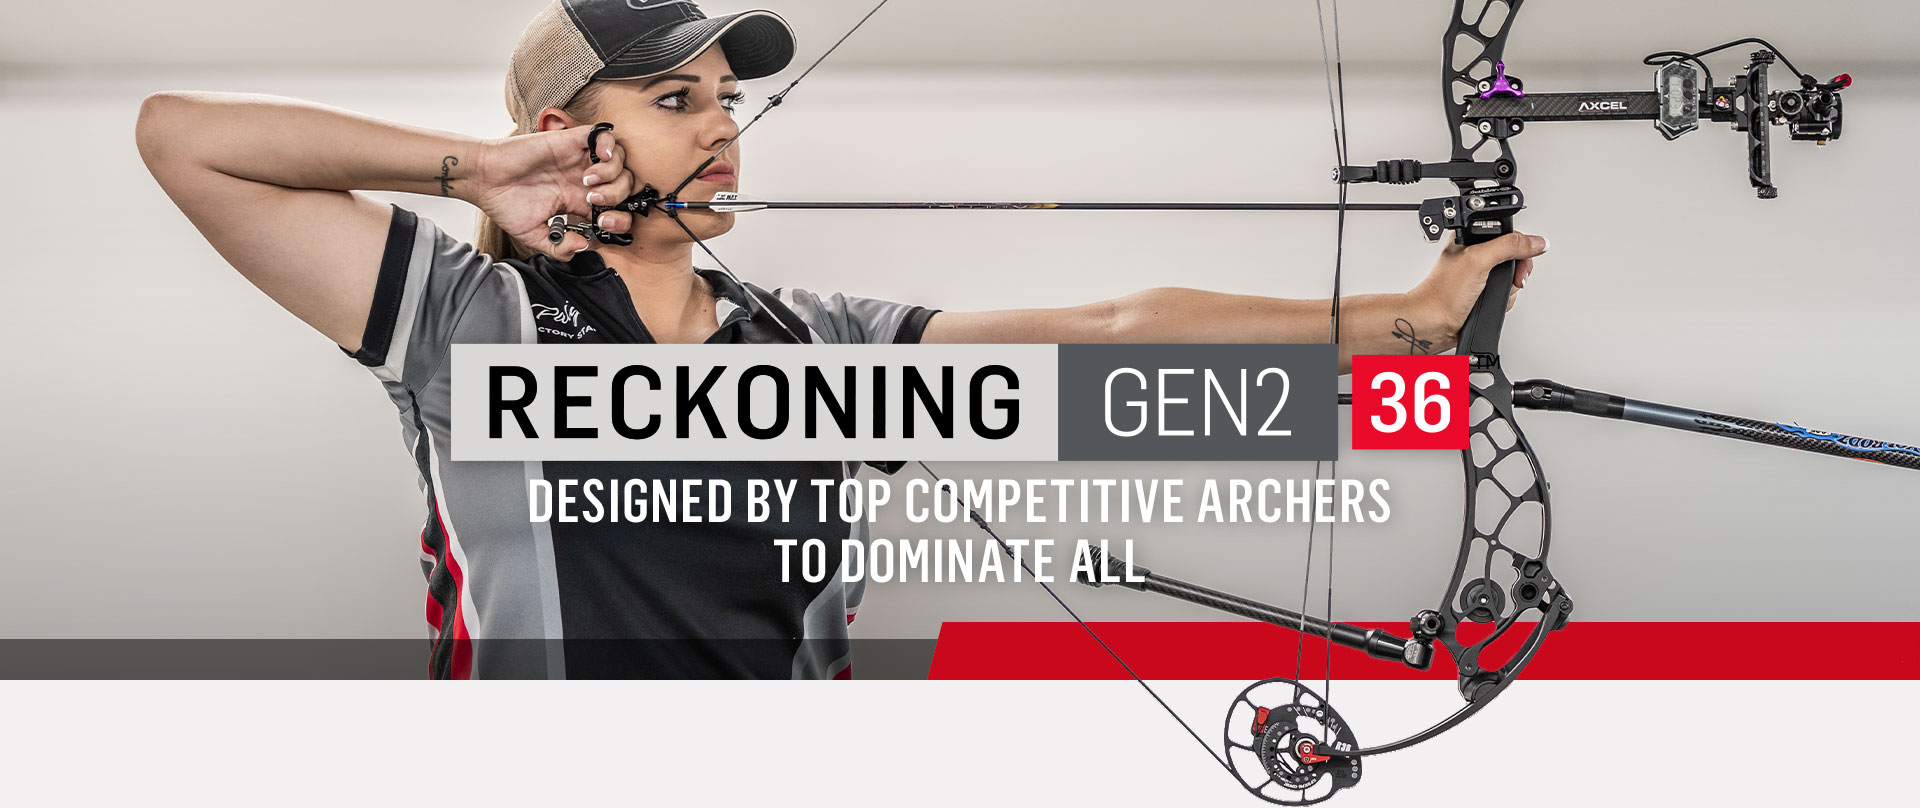 Reckoning Gen2 36 - Designed by Top Competitive Archers to Dominate All